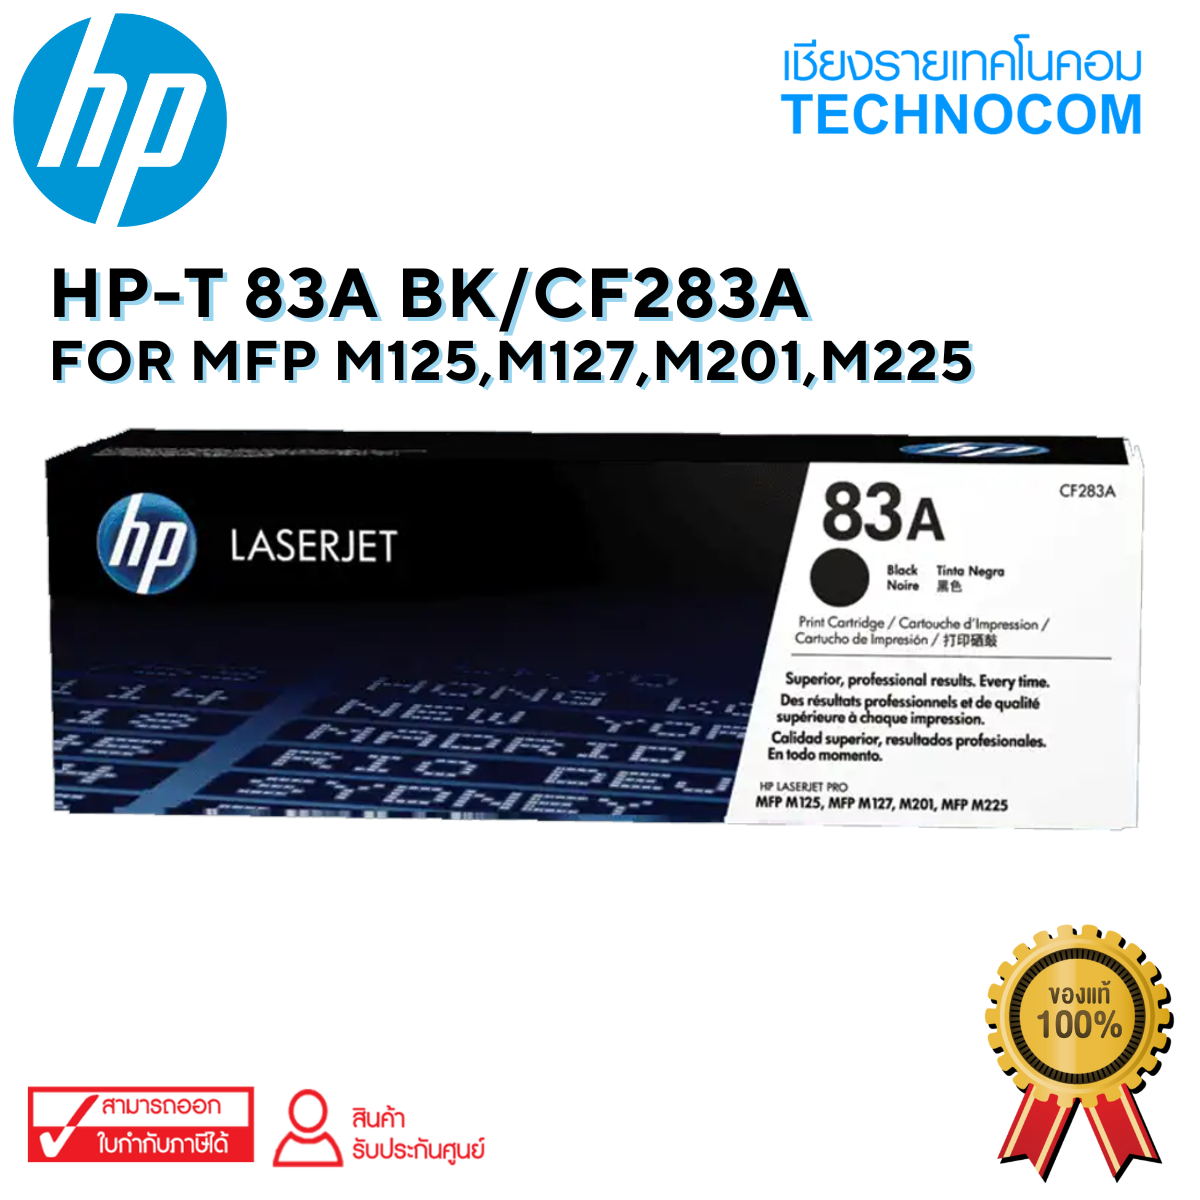 HP-T 83A BK/CF283A For MFP M125,M127,M201,M225